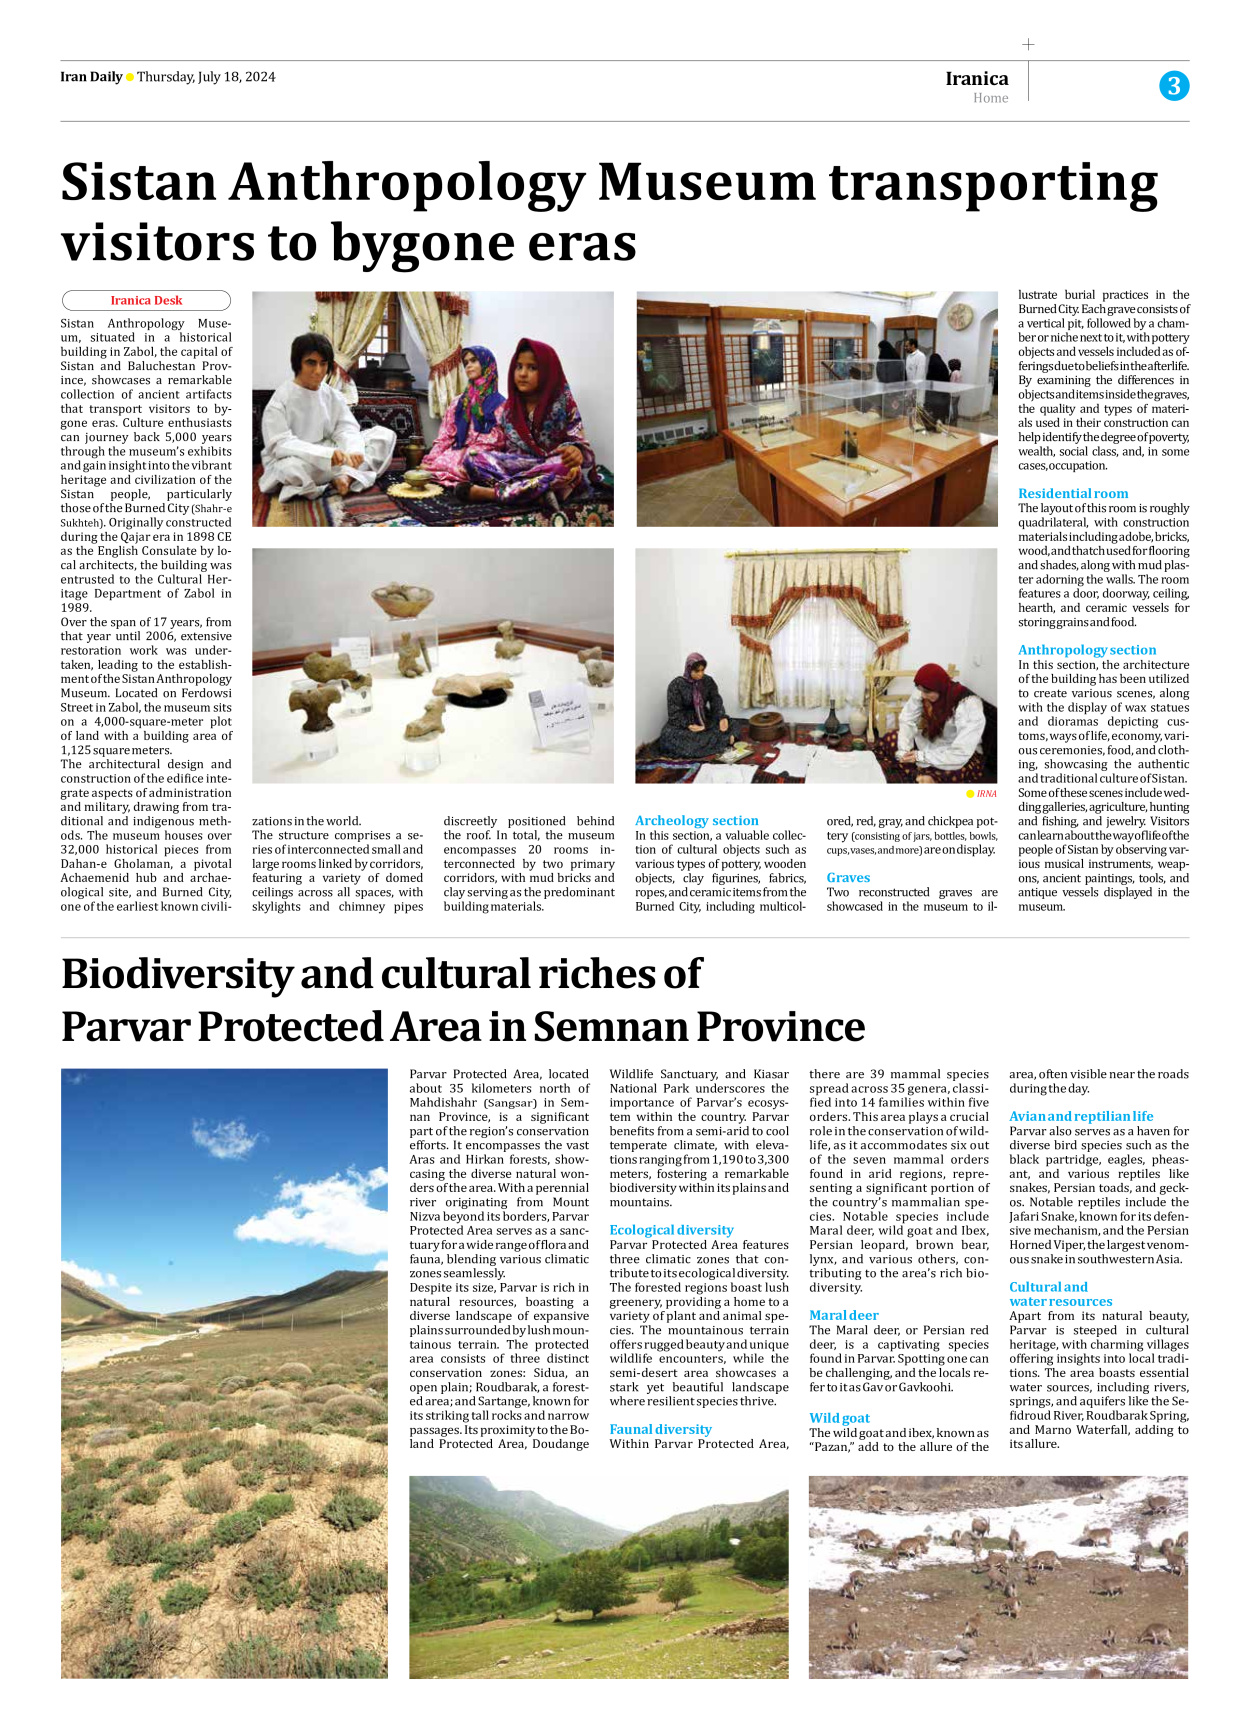 Iran Daily - Number Seven Thousand Six Hundred and Six - 18 July 2024 - Page 3